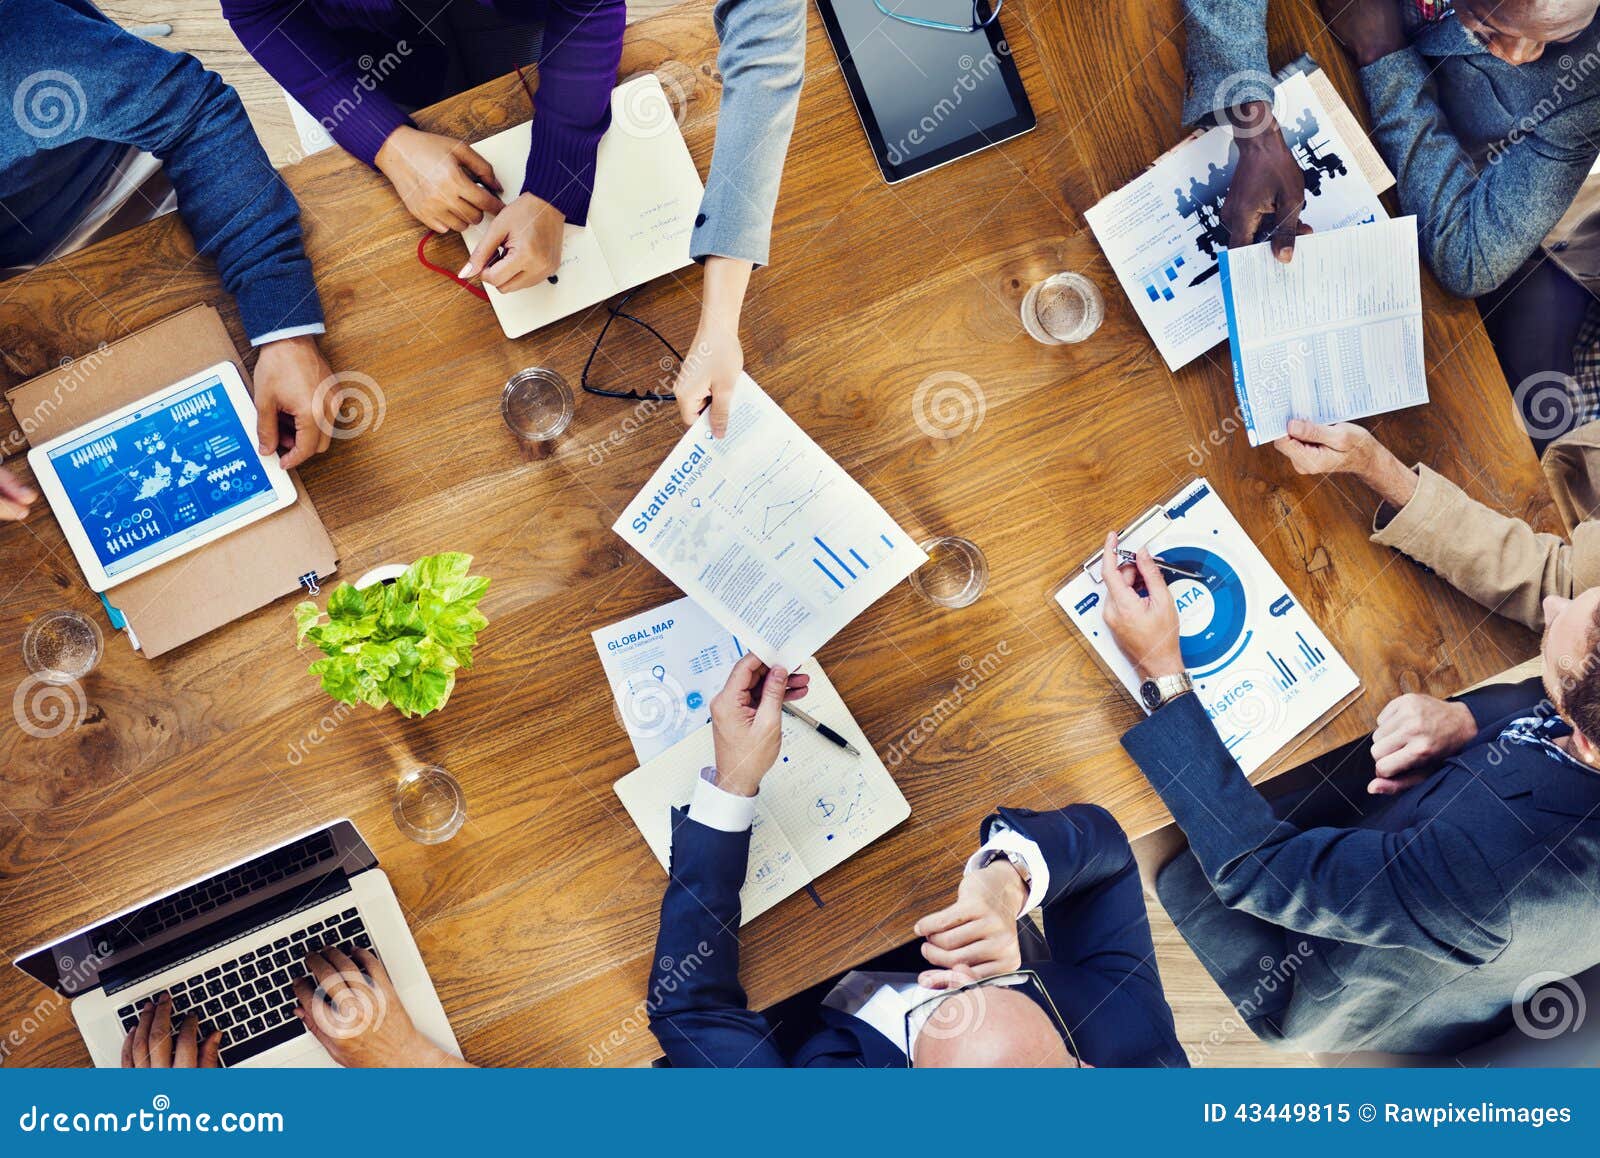 group of multiethnic busy people working in an office